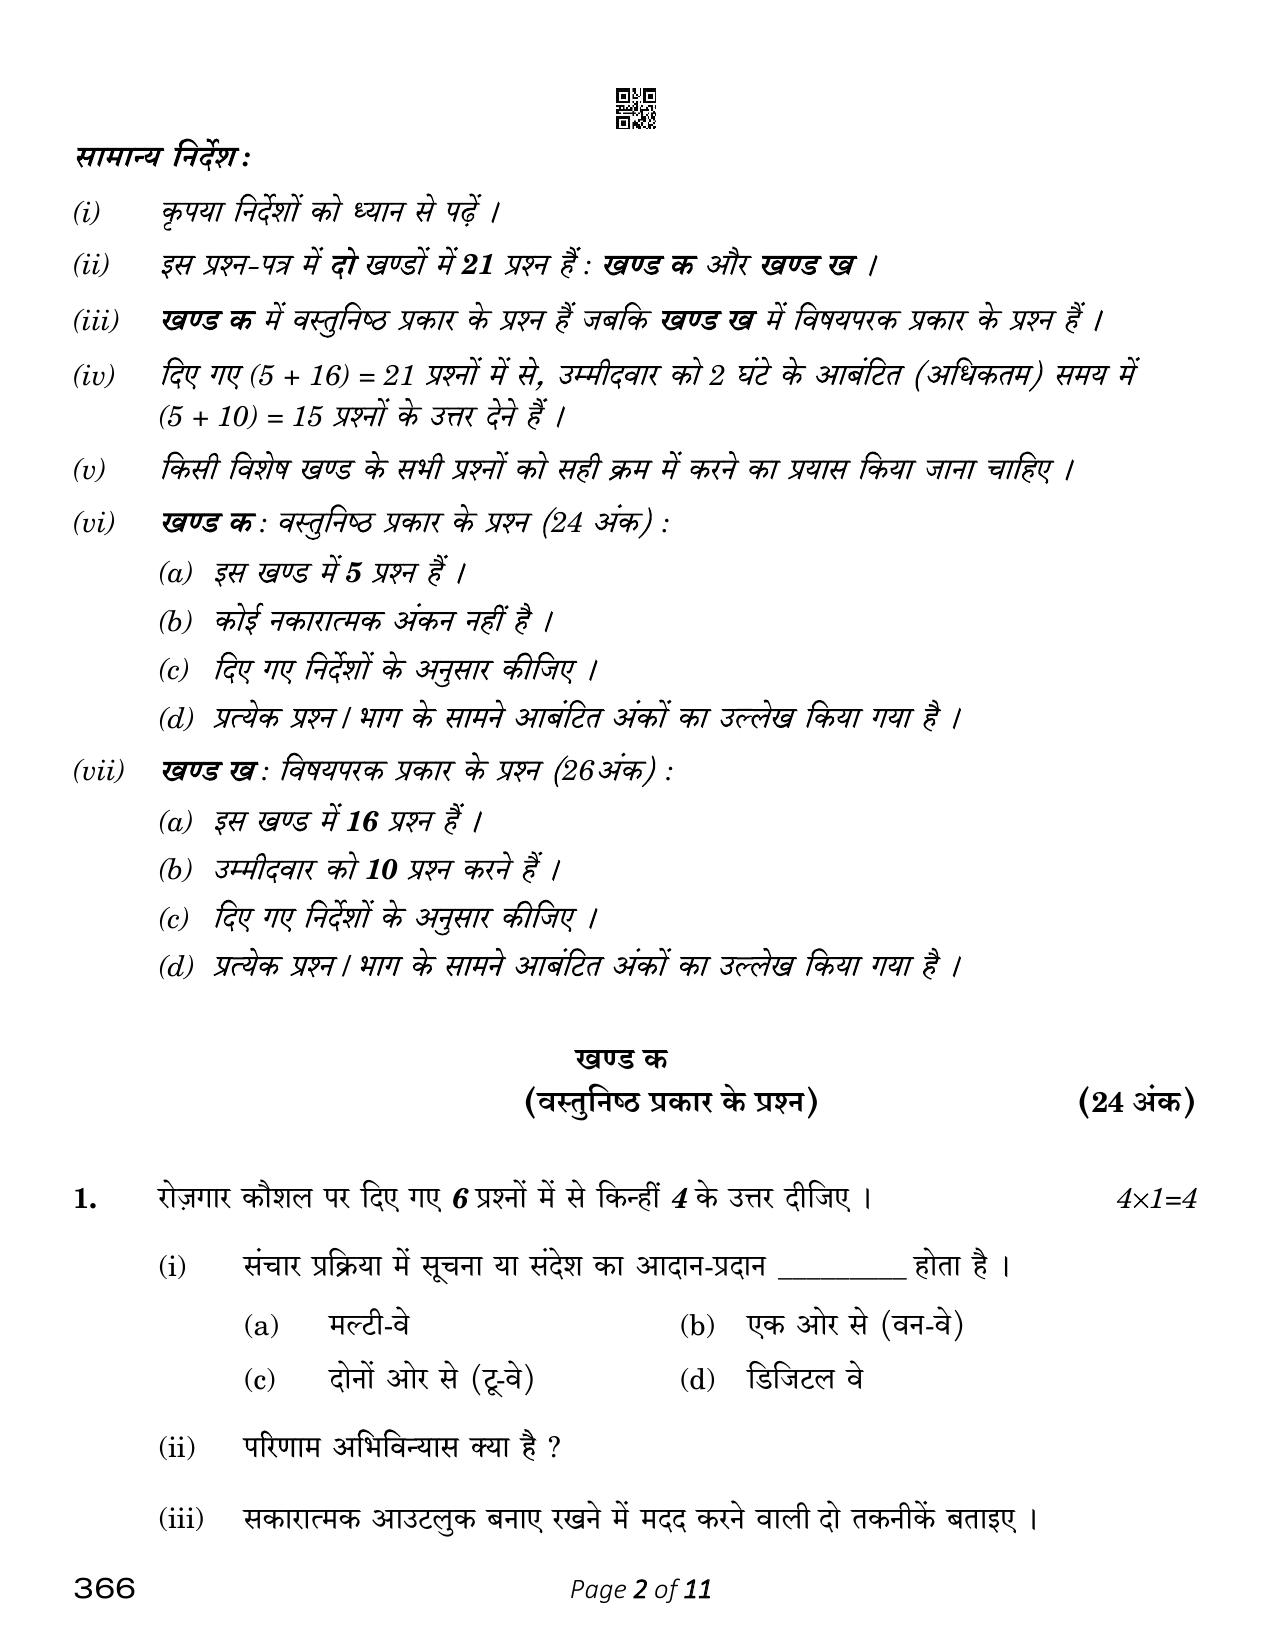 CBSE Class 12 Early Childhood Care & Education (Compartment) 2023 Question Paper - Page 2